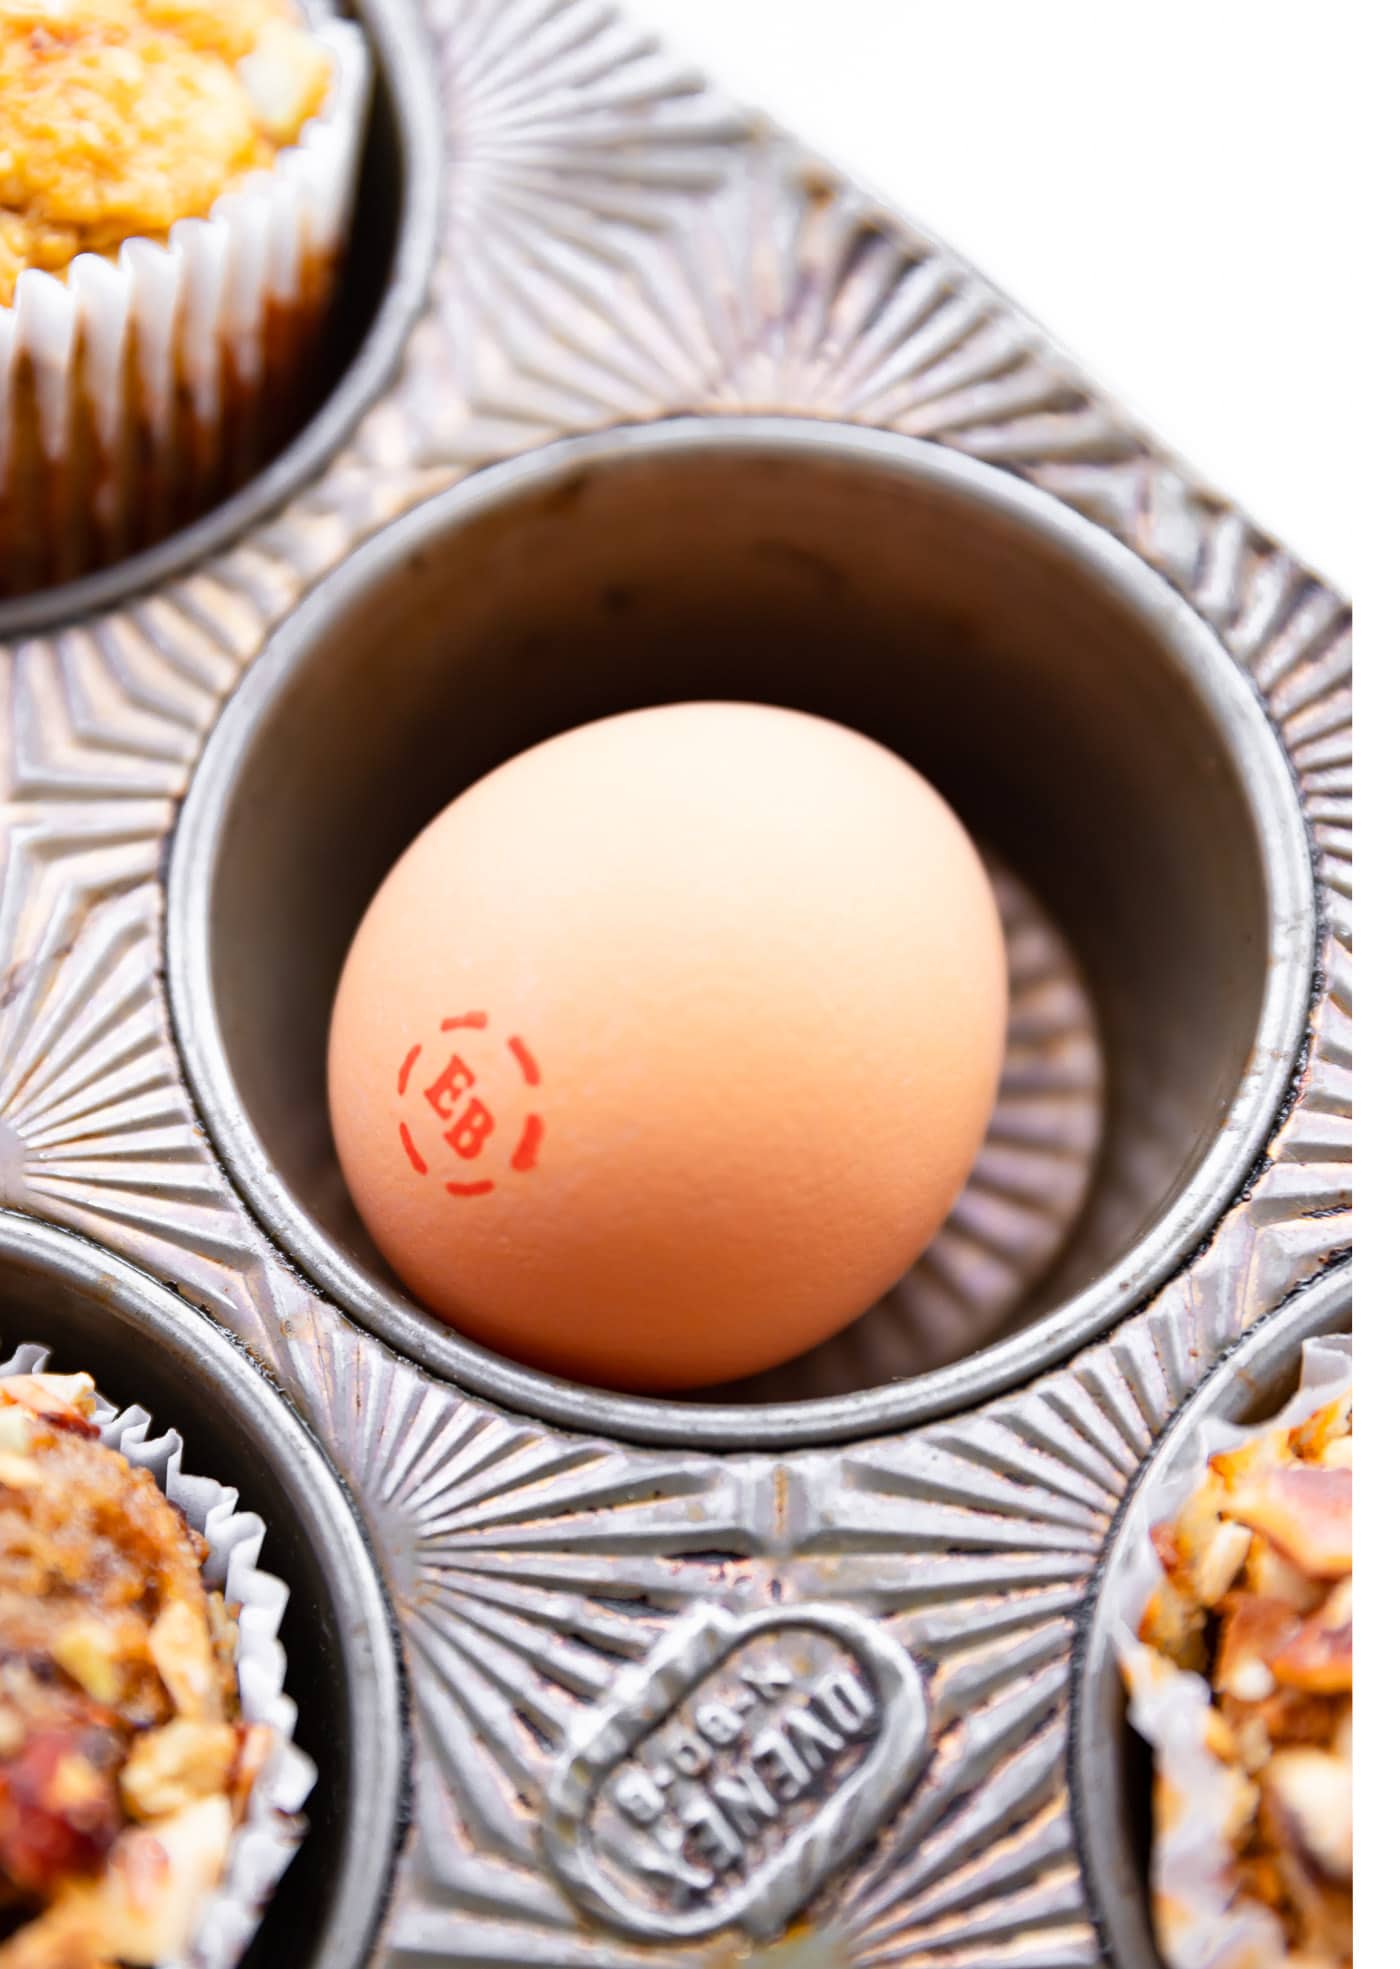 Eggland's Best Cage Free Brown Egg in muffin pan